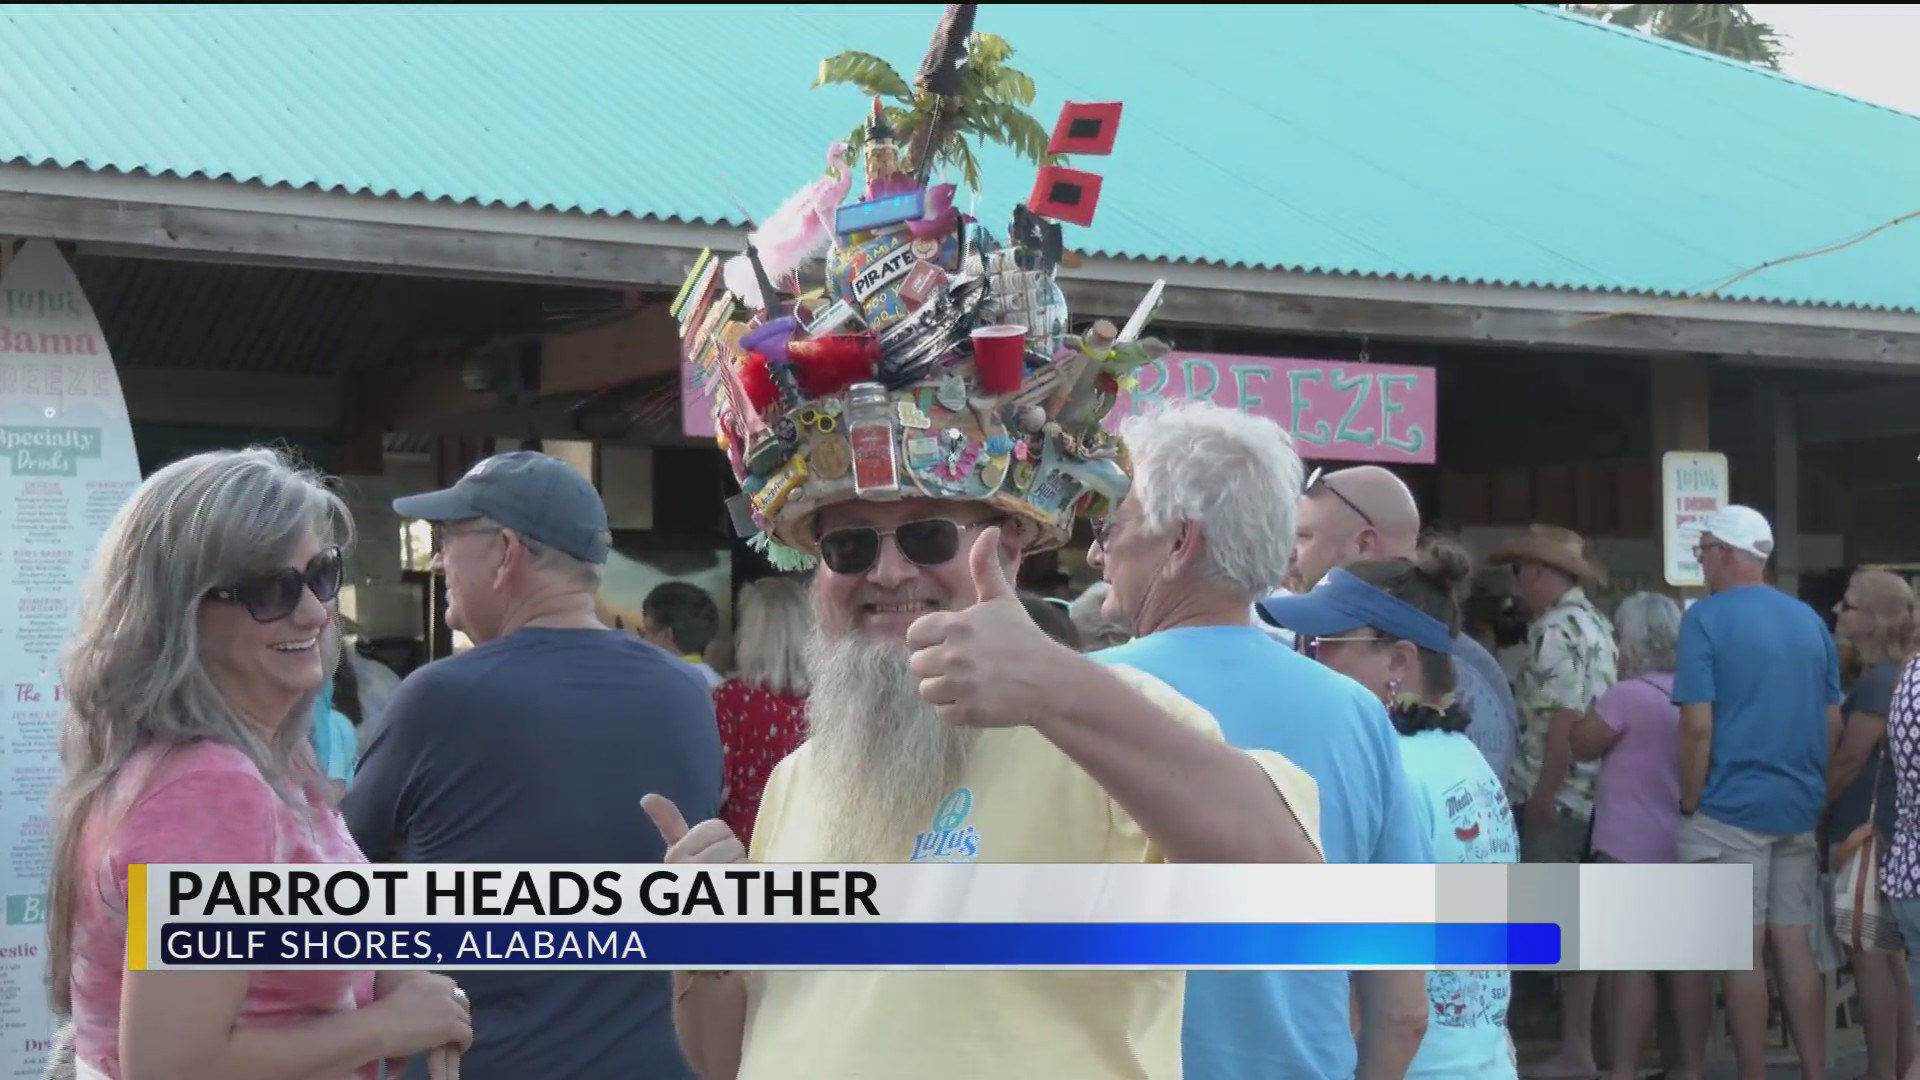 Parrot Heads from all over the country have made it to Gulf Shores for